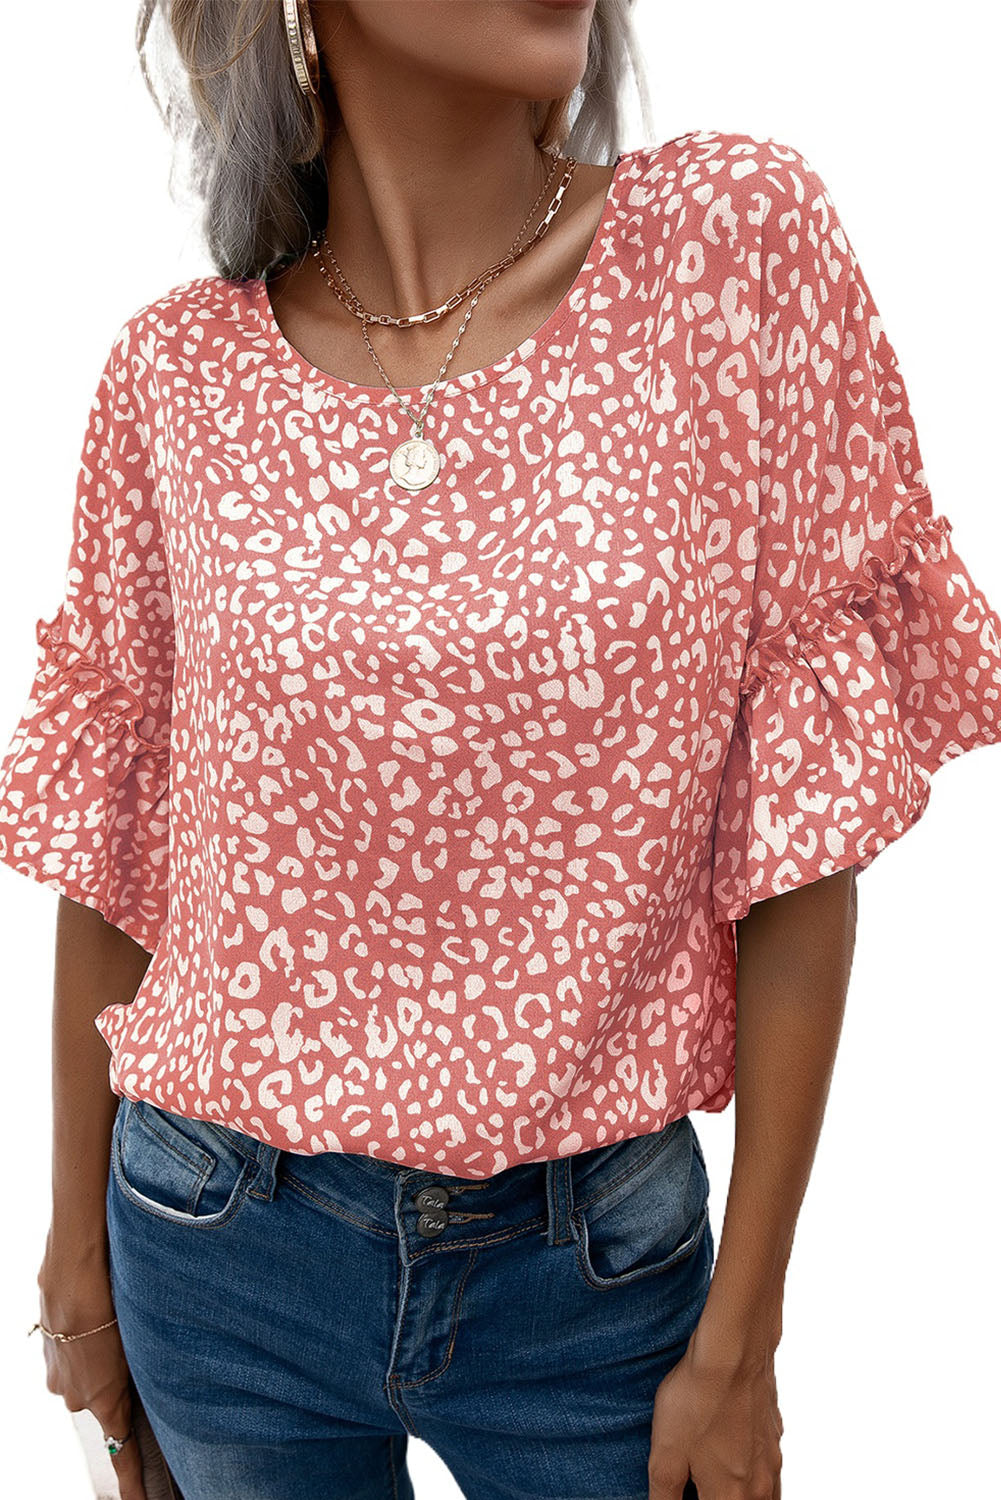 Pink Leopard Print Casual Flounce Sleeve Blouse for Women - Cowtown Bling N Things